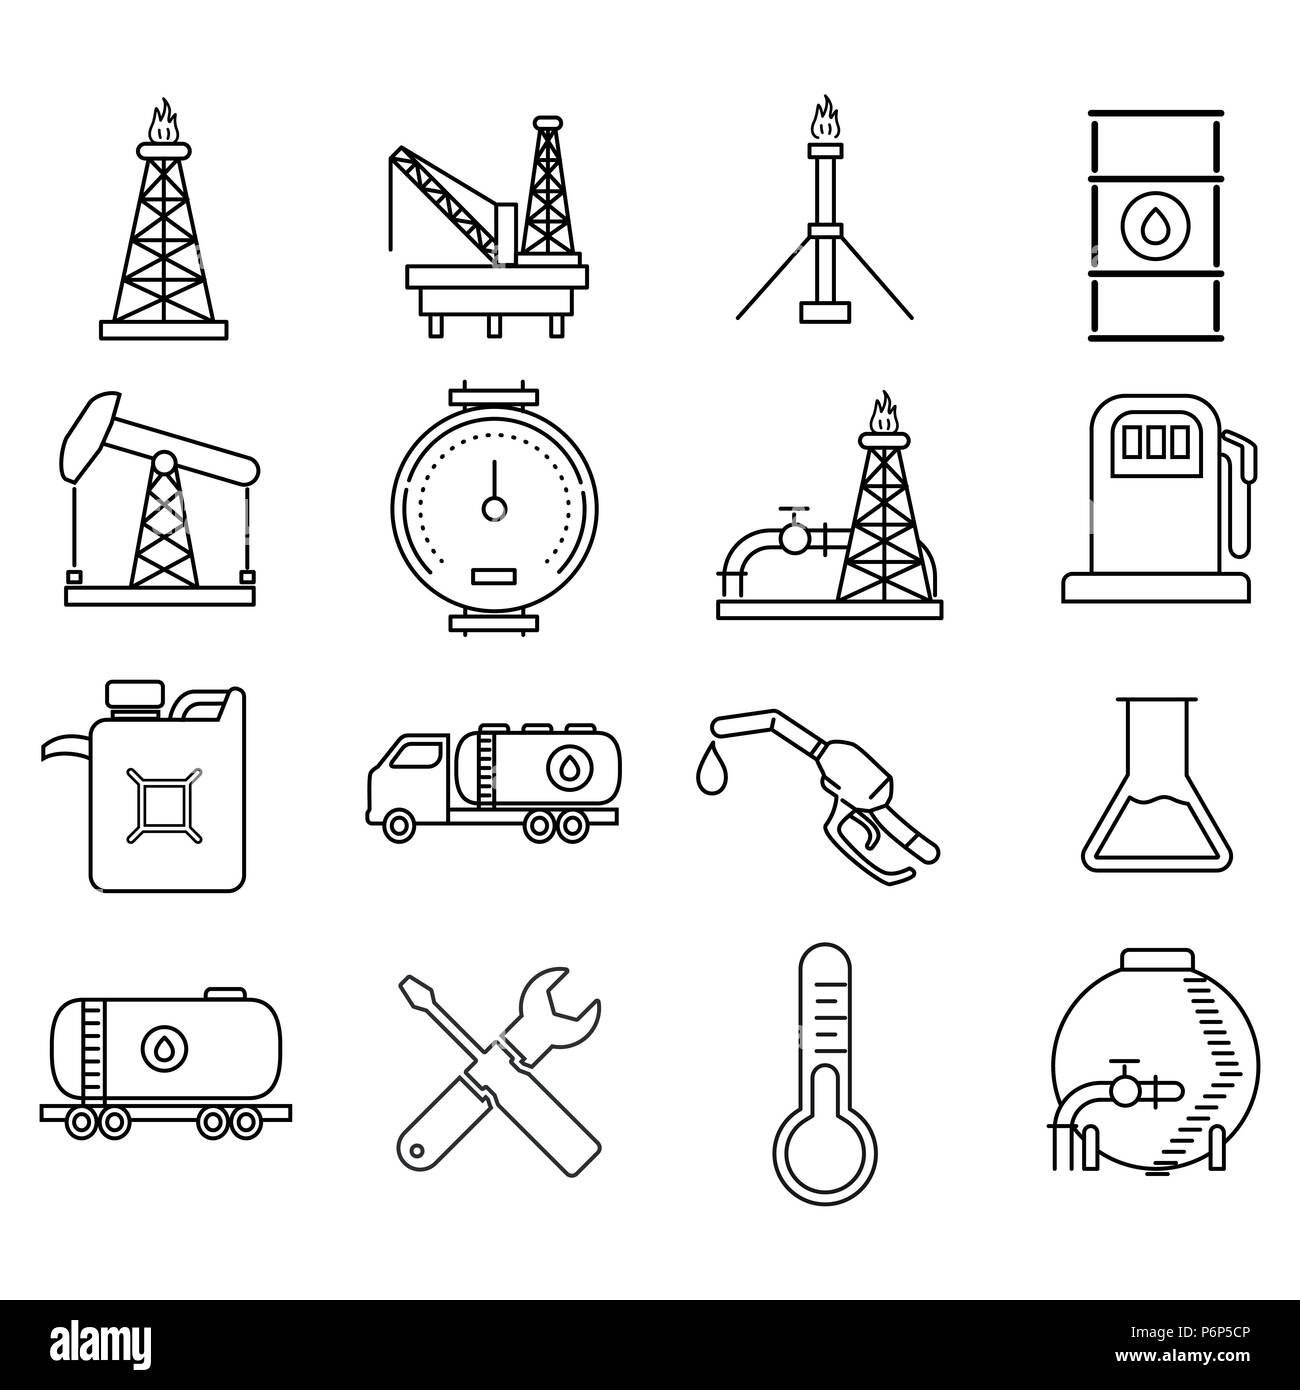 Oil petroleum And Energy Resources Icons set. Flat thin line icons modern design style isolated on white background - Vector Iconic design. Stock Vector